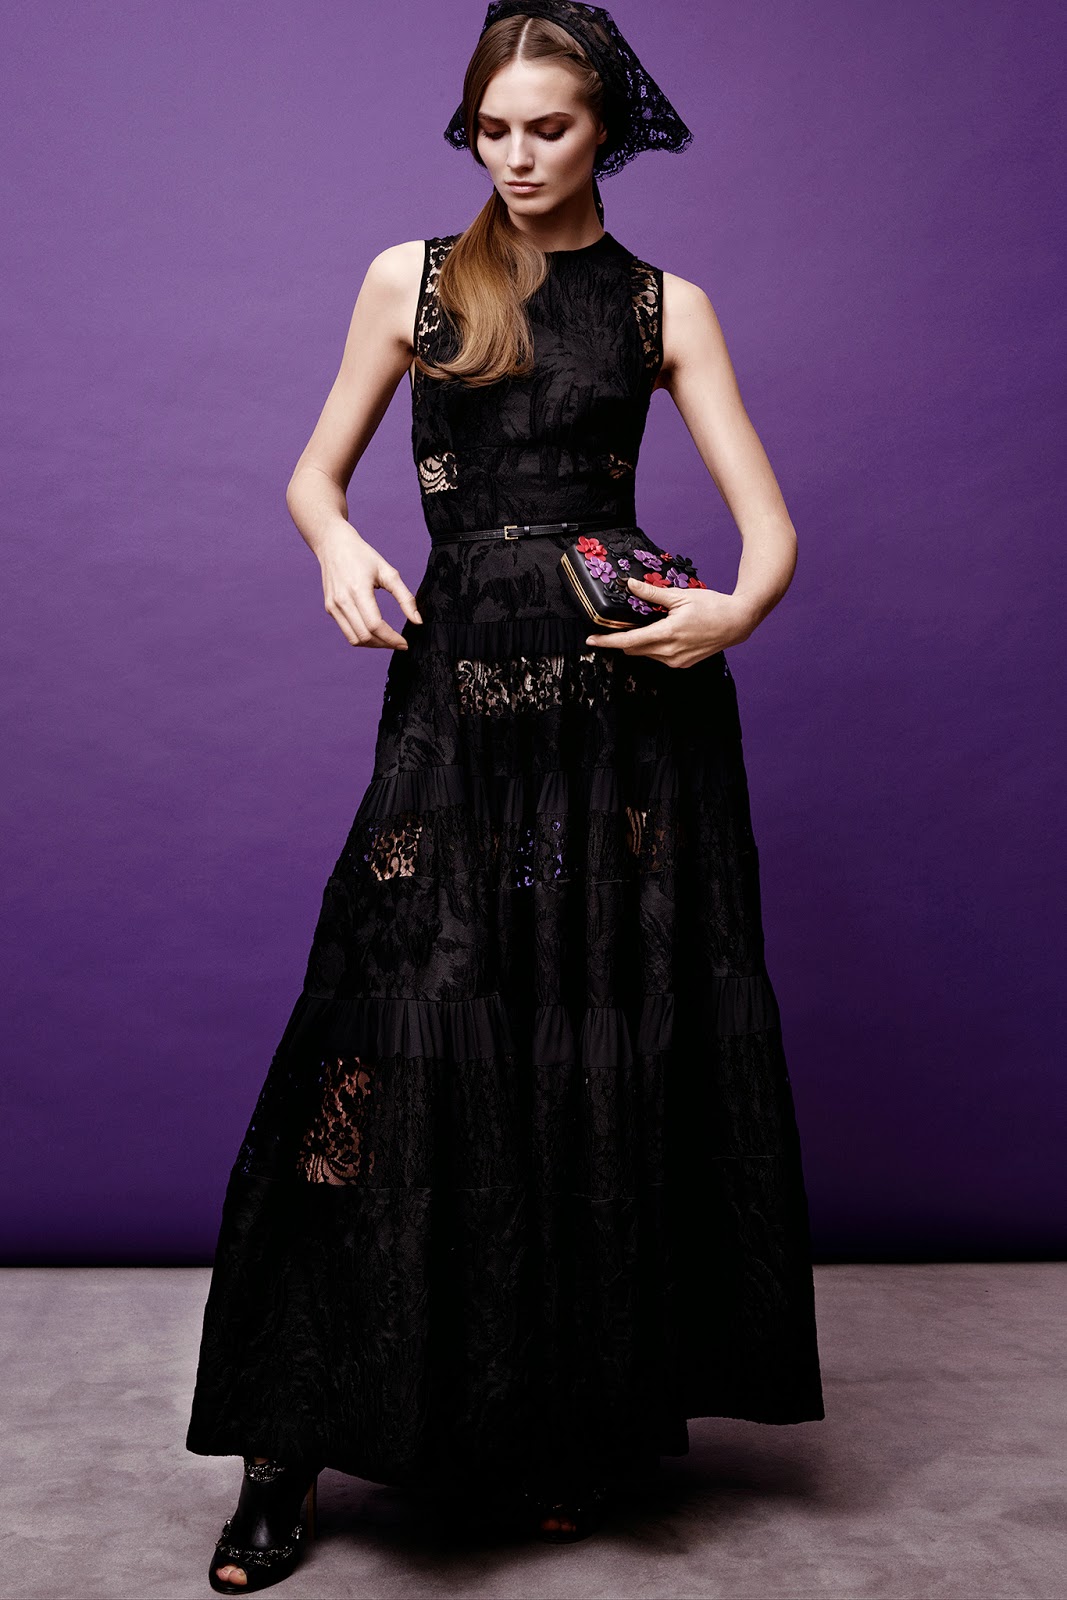 ANDREA JANKE Finest Accessories: 'Folk Reverie' by ELIE SAAB Pre-Fall 2015